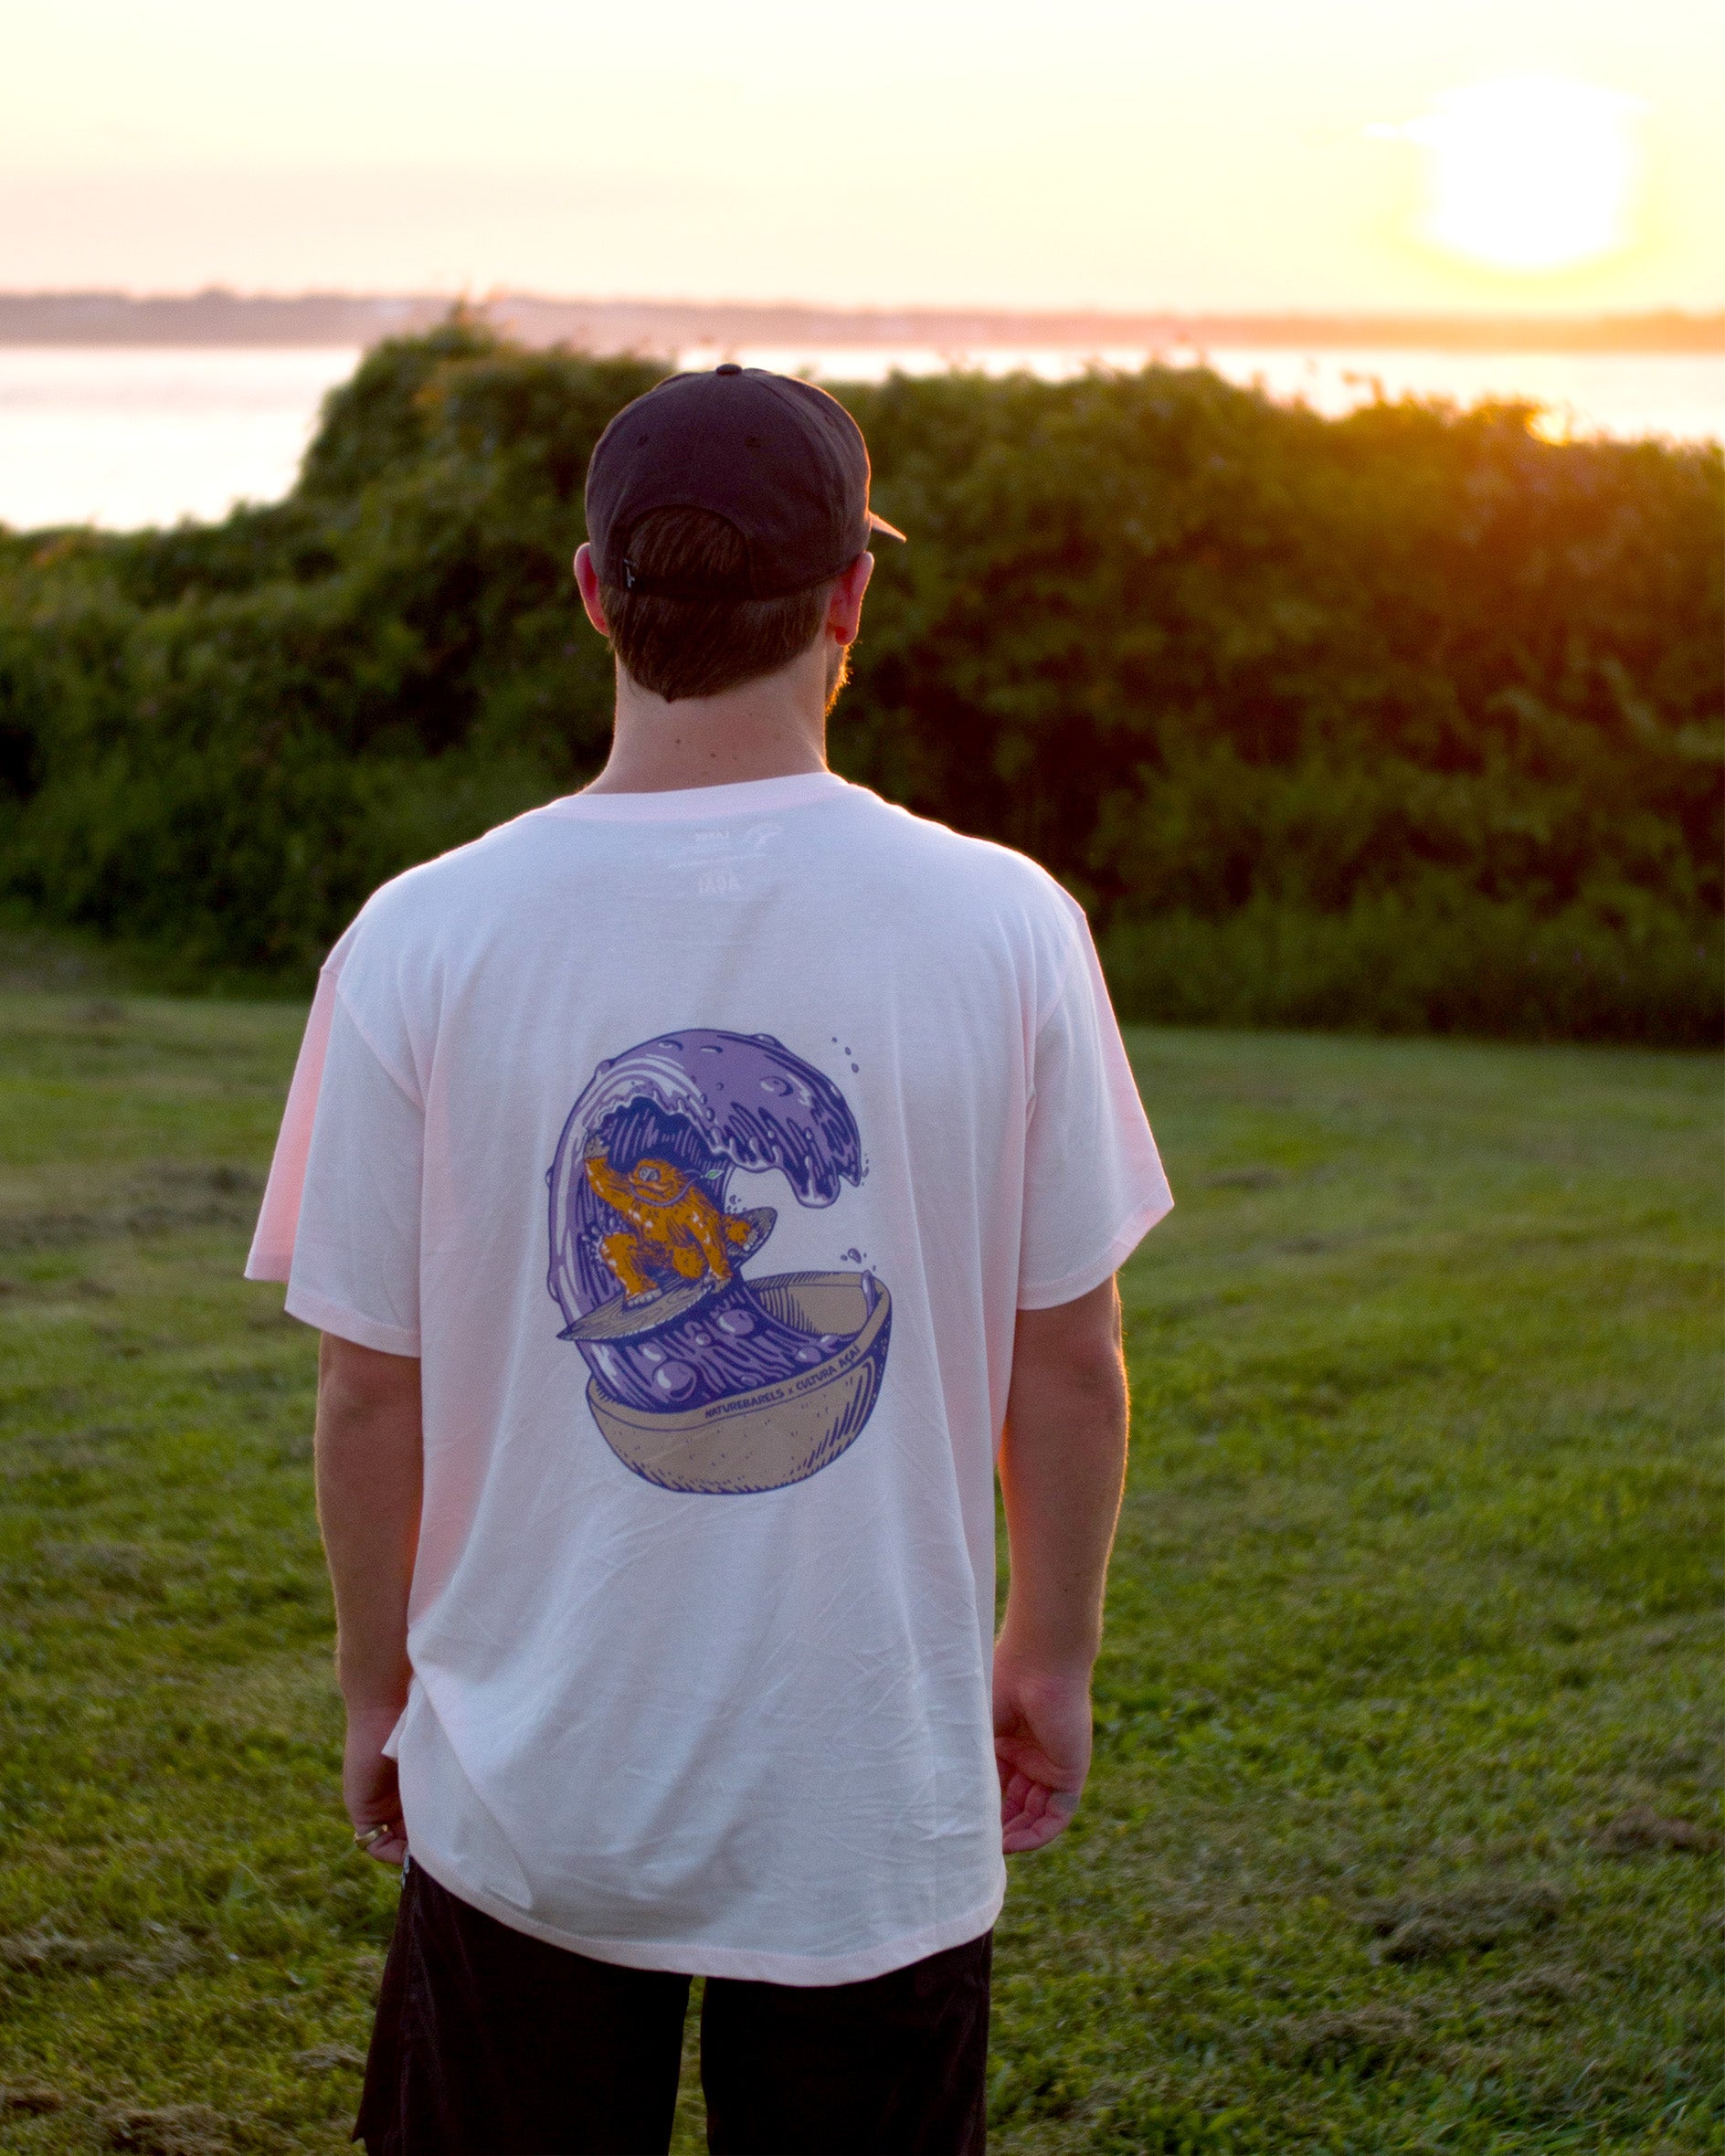 A person wearing a cap and a light pink t-shirt with a back graphic of an orange sasquatch riding a wooden surfboard on a purple wave made of acai liquid coming out of a bowl. The person is standing in a grass field at sunset